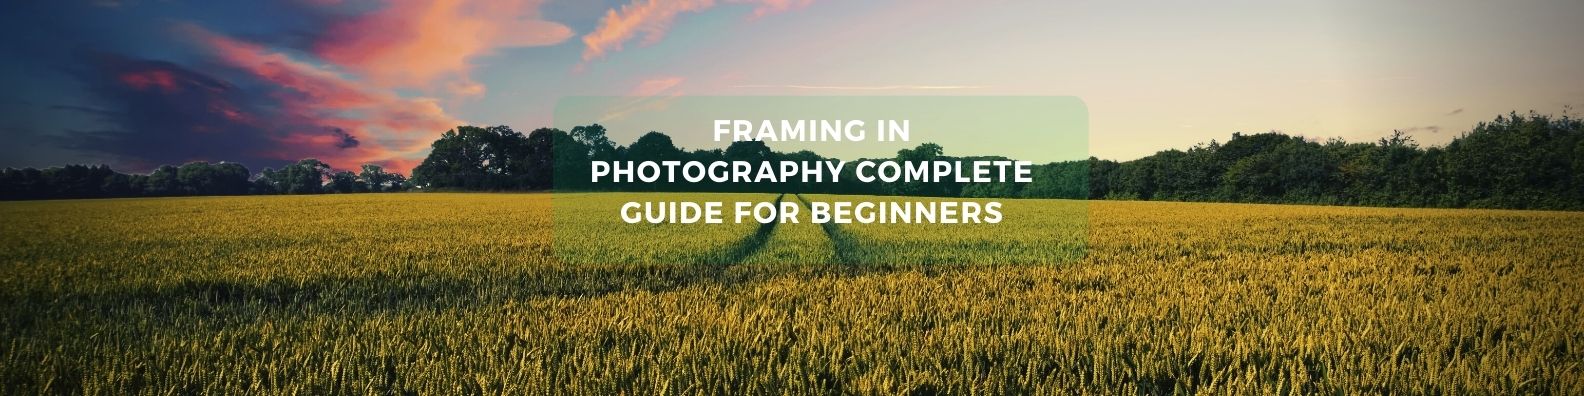 Framing in photography complete guide for beginners